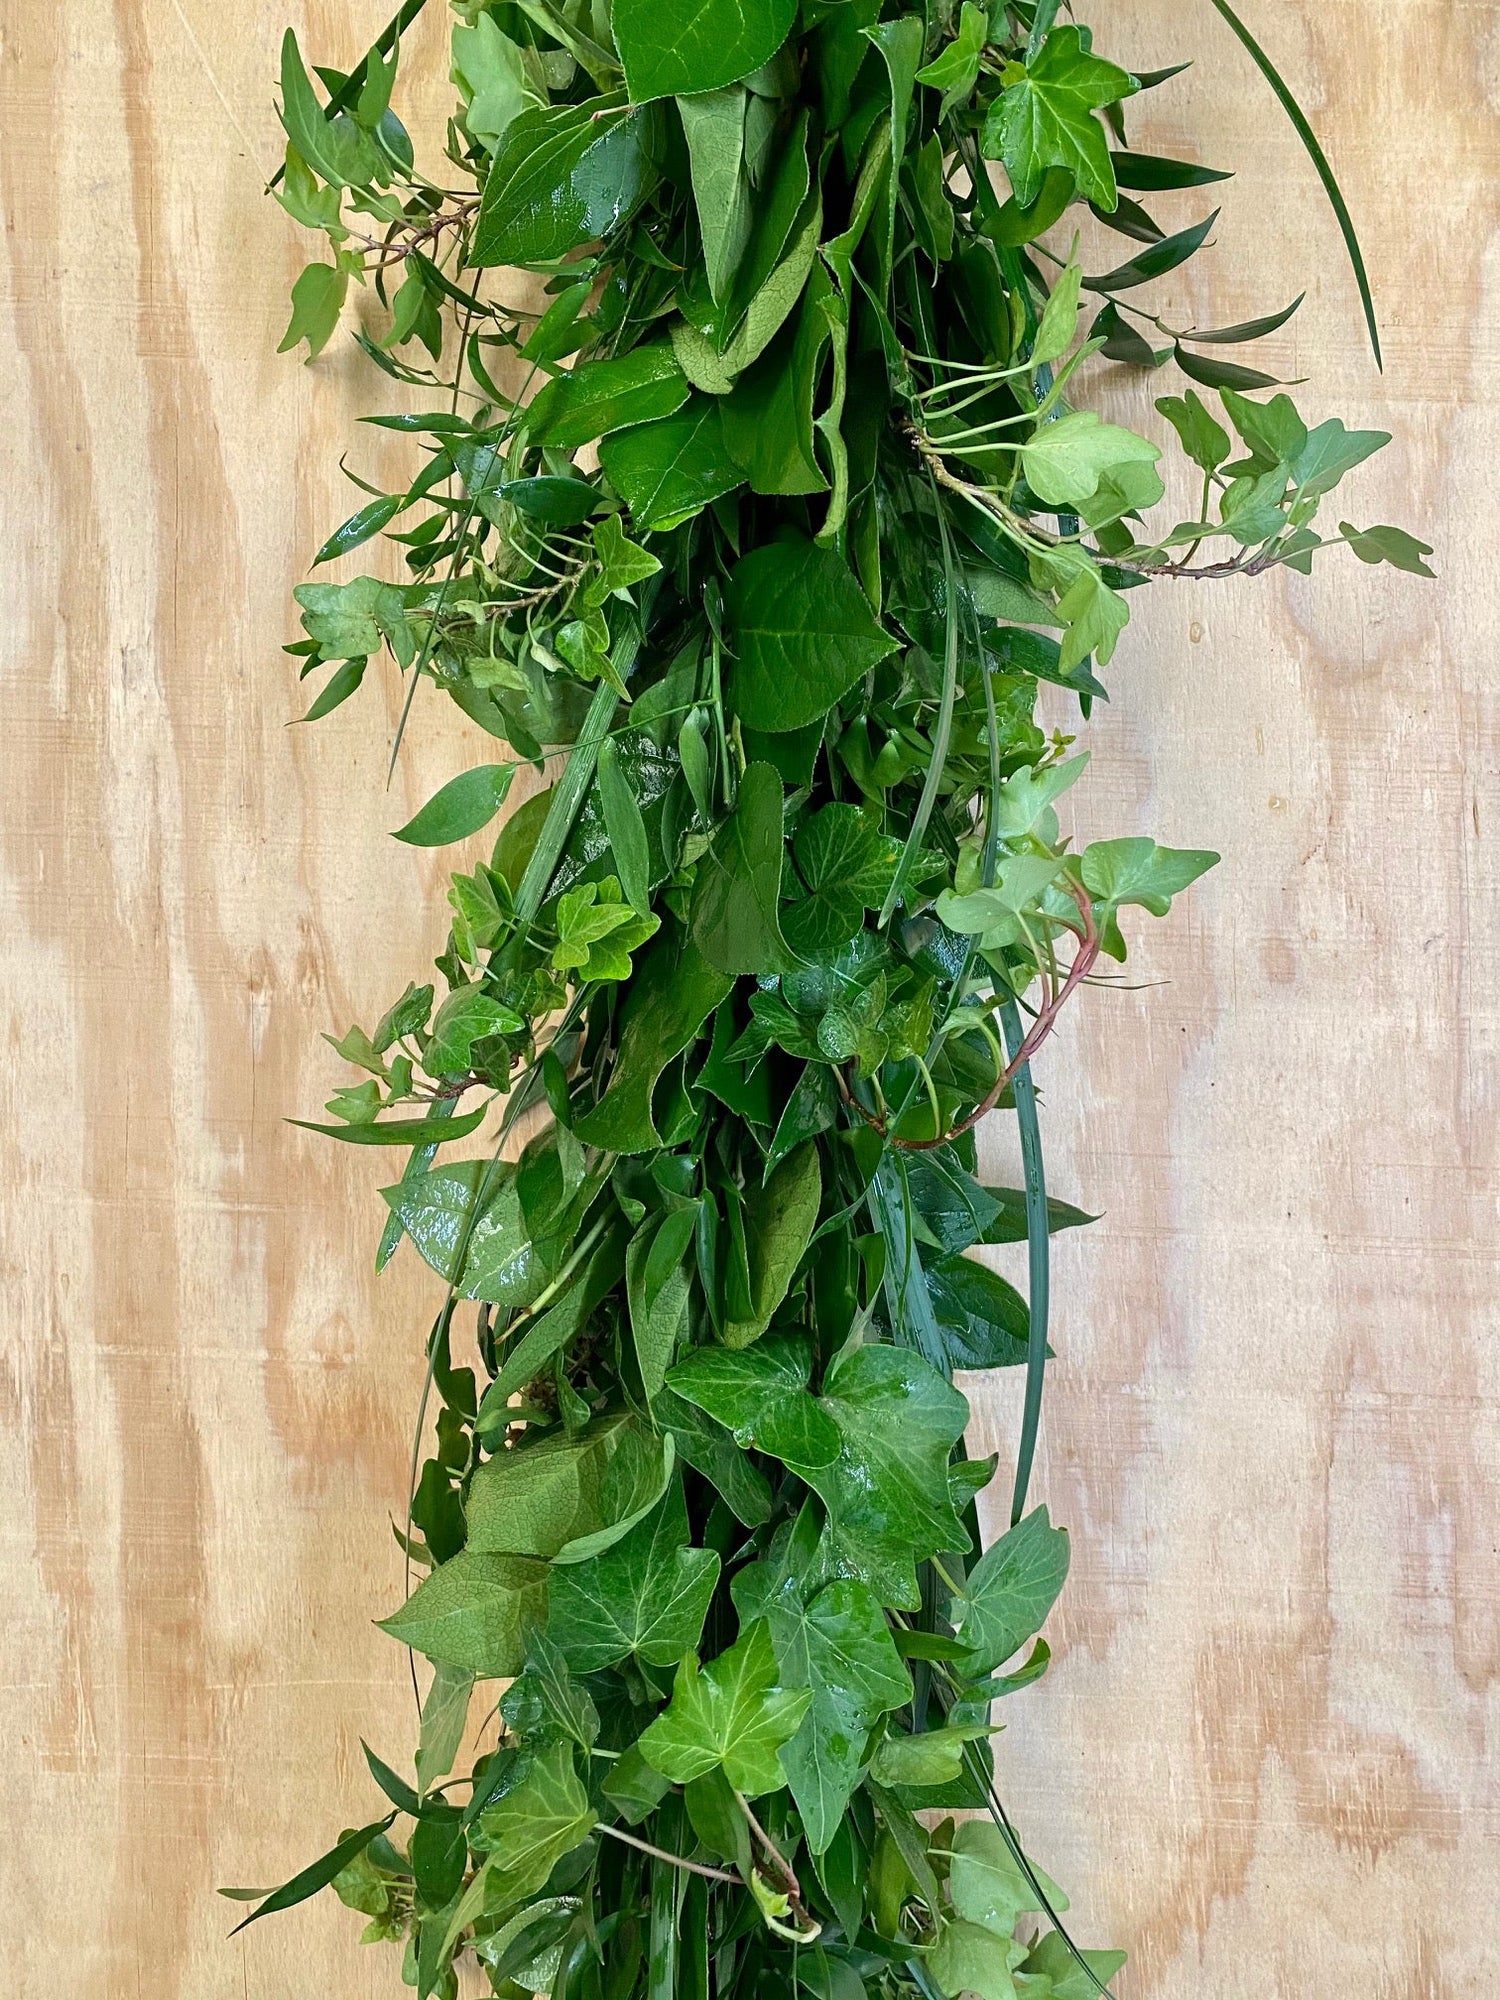 Salal, Italian Ruscus, Green Ivy, and Lilly Grass Garland.